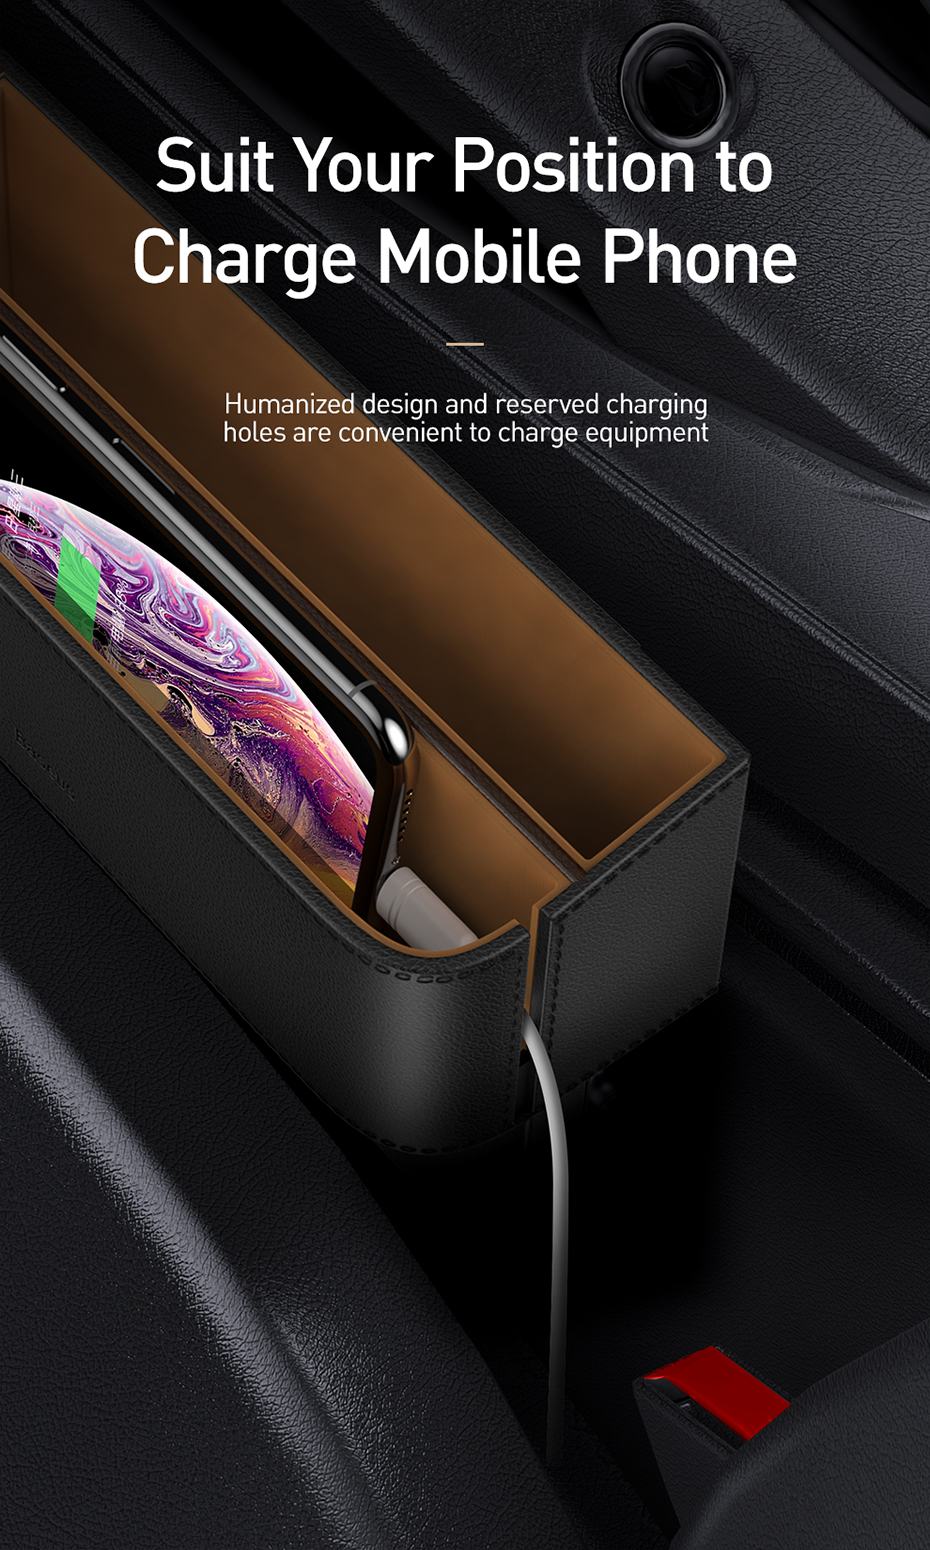 Baseus-Leather-Car-Seat-Organizer-Bag-Cup-Drink-Phone-Coin-Stowing-Tidying-Storage-Box-1577301-5